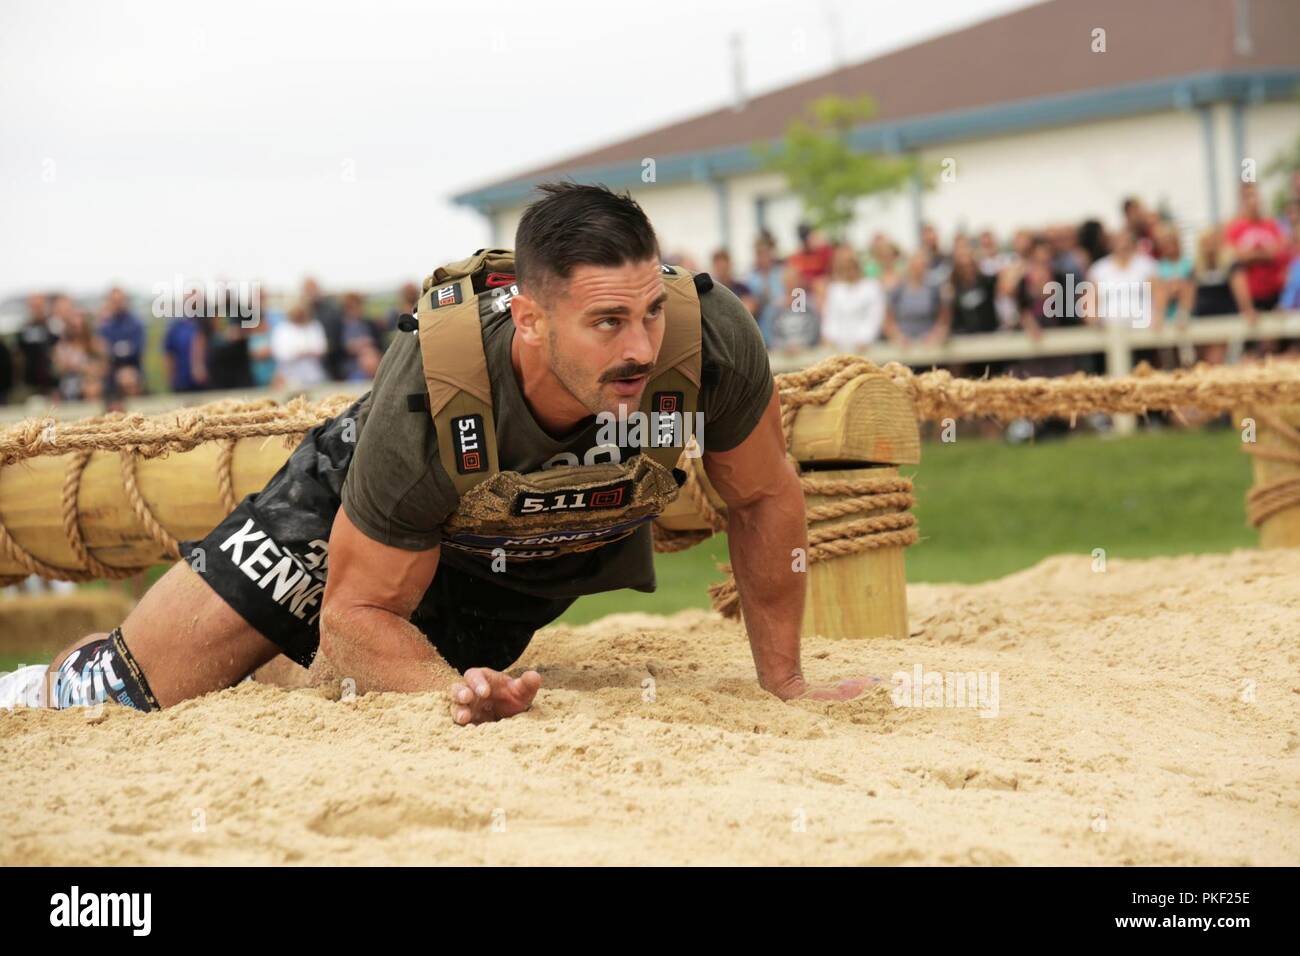 CrossFit athlete Craig Kenney negotiates the obstacles on the  "Battleground" during the 2018 Reebok CrossFit Games in Madison, Wisconsin,  August 3, 2018. The CrossFit Games is the world's premiere test to find